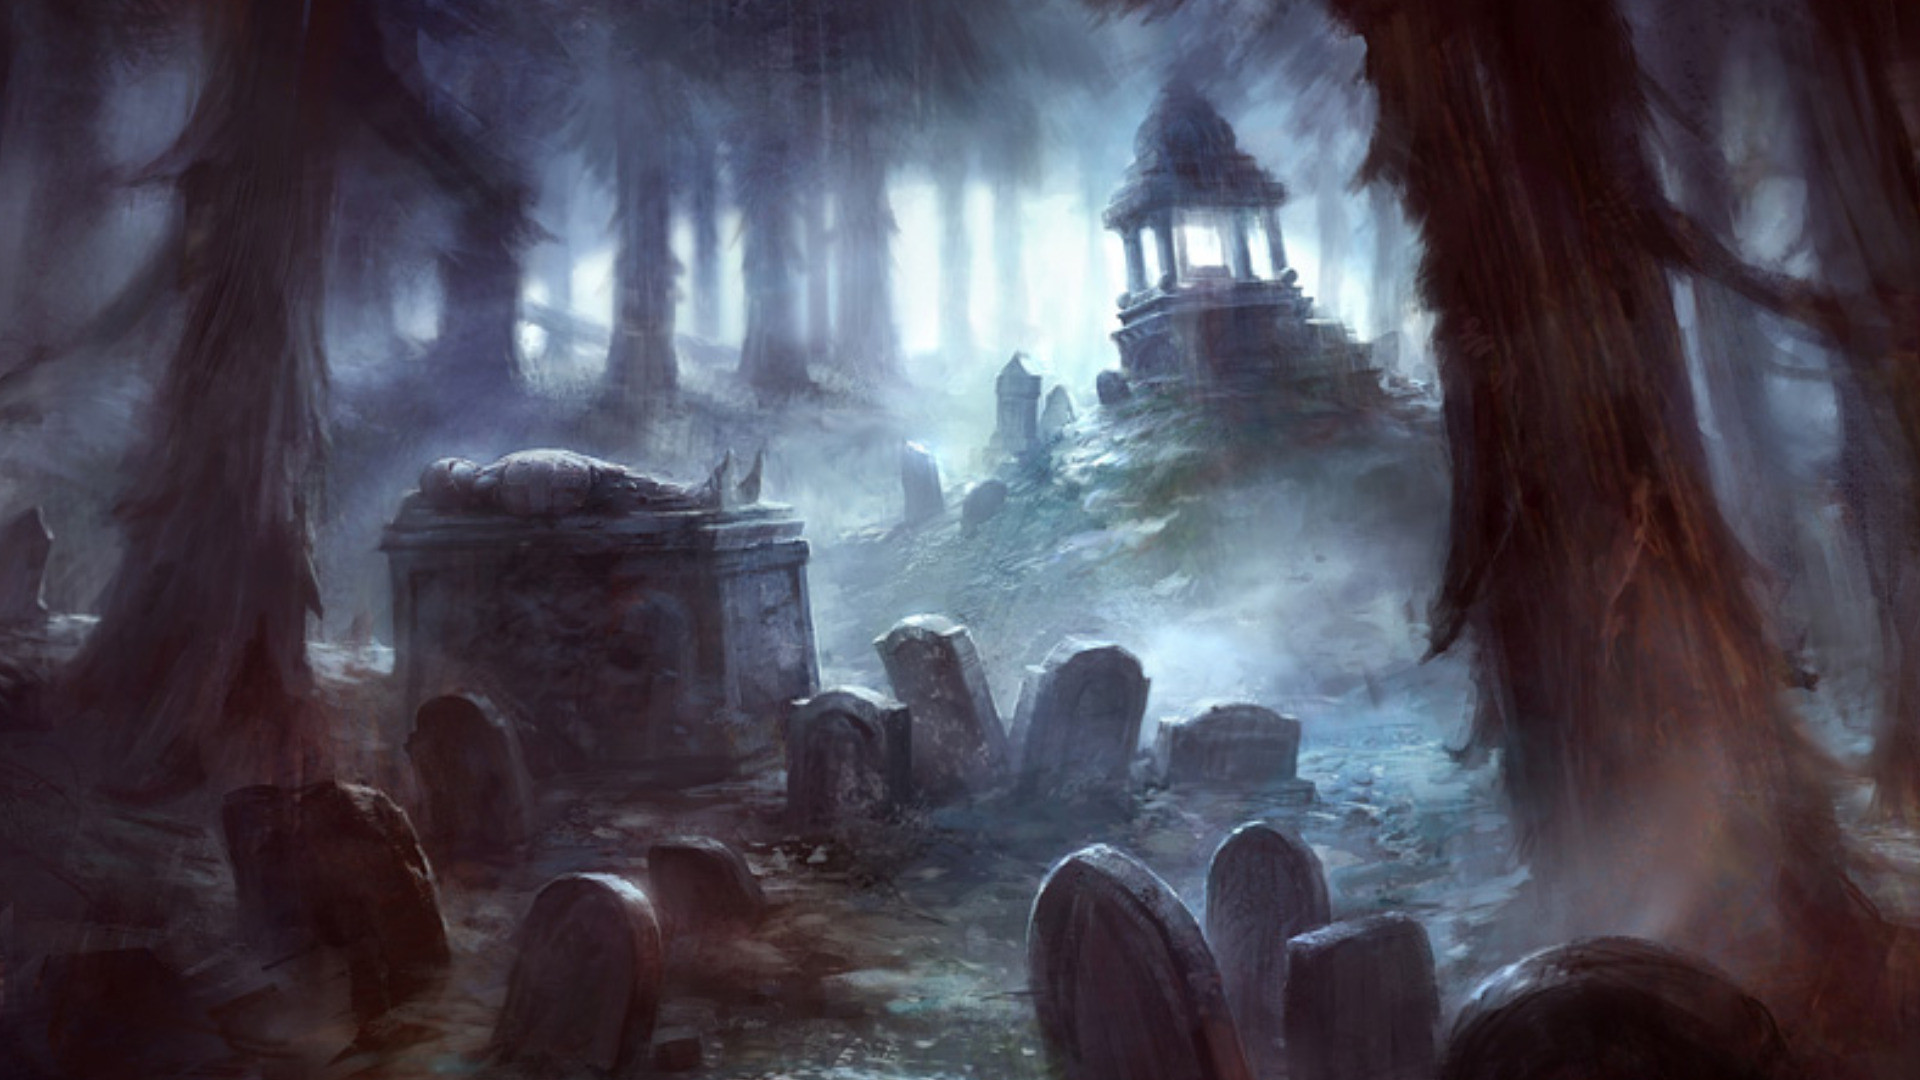 1920x1080 Explore and share Spooky Graveyard Wallpaper